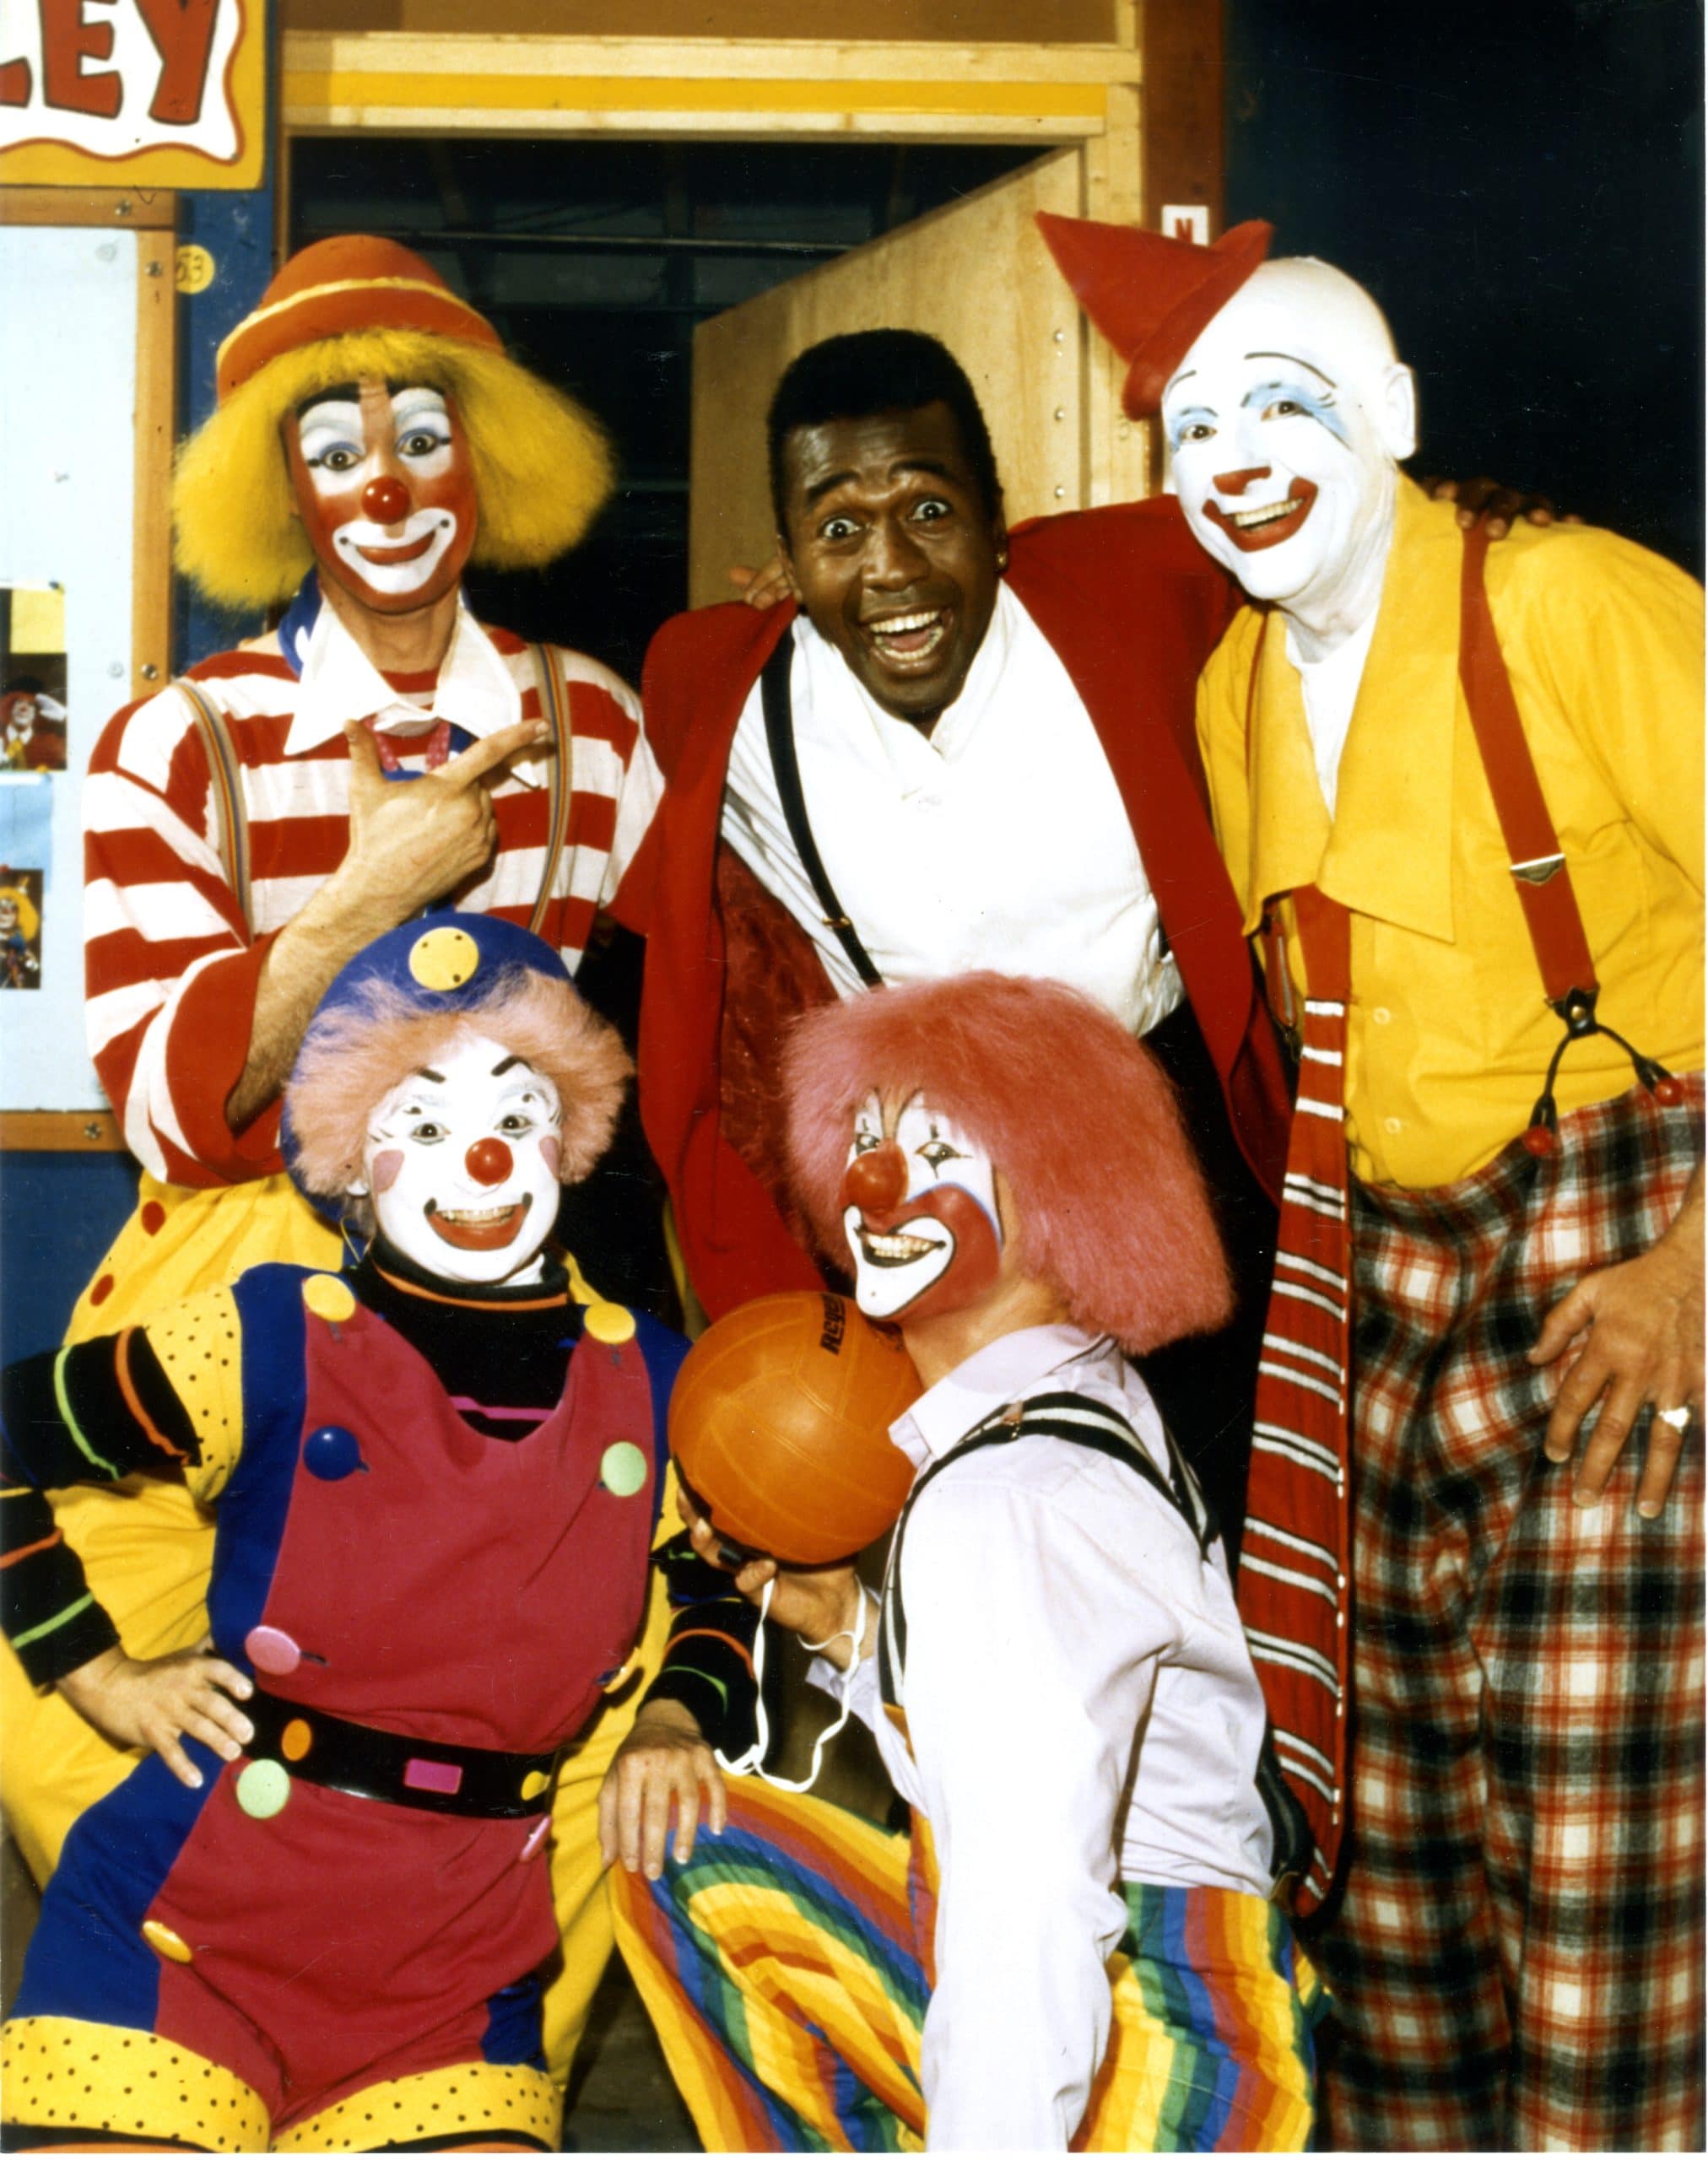 RINGLING BROS. AND BARNUM AND BAILEY CIRCUS 116th EDITION, Ben Vereen, aired April 16, 1986